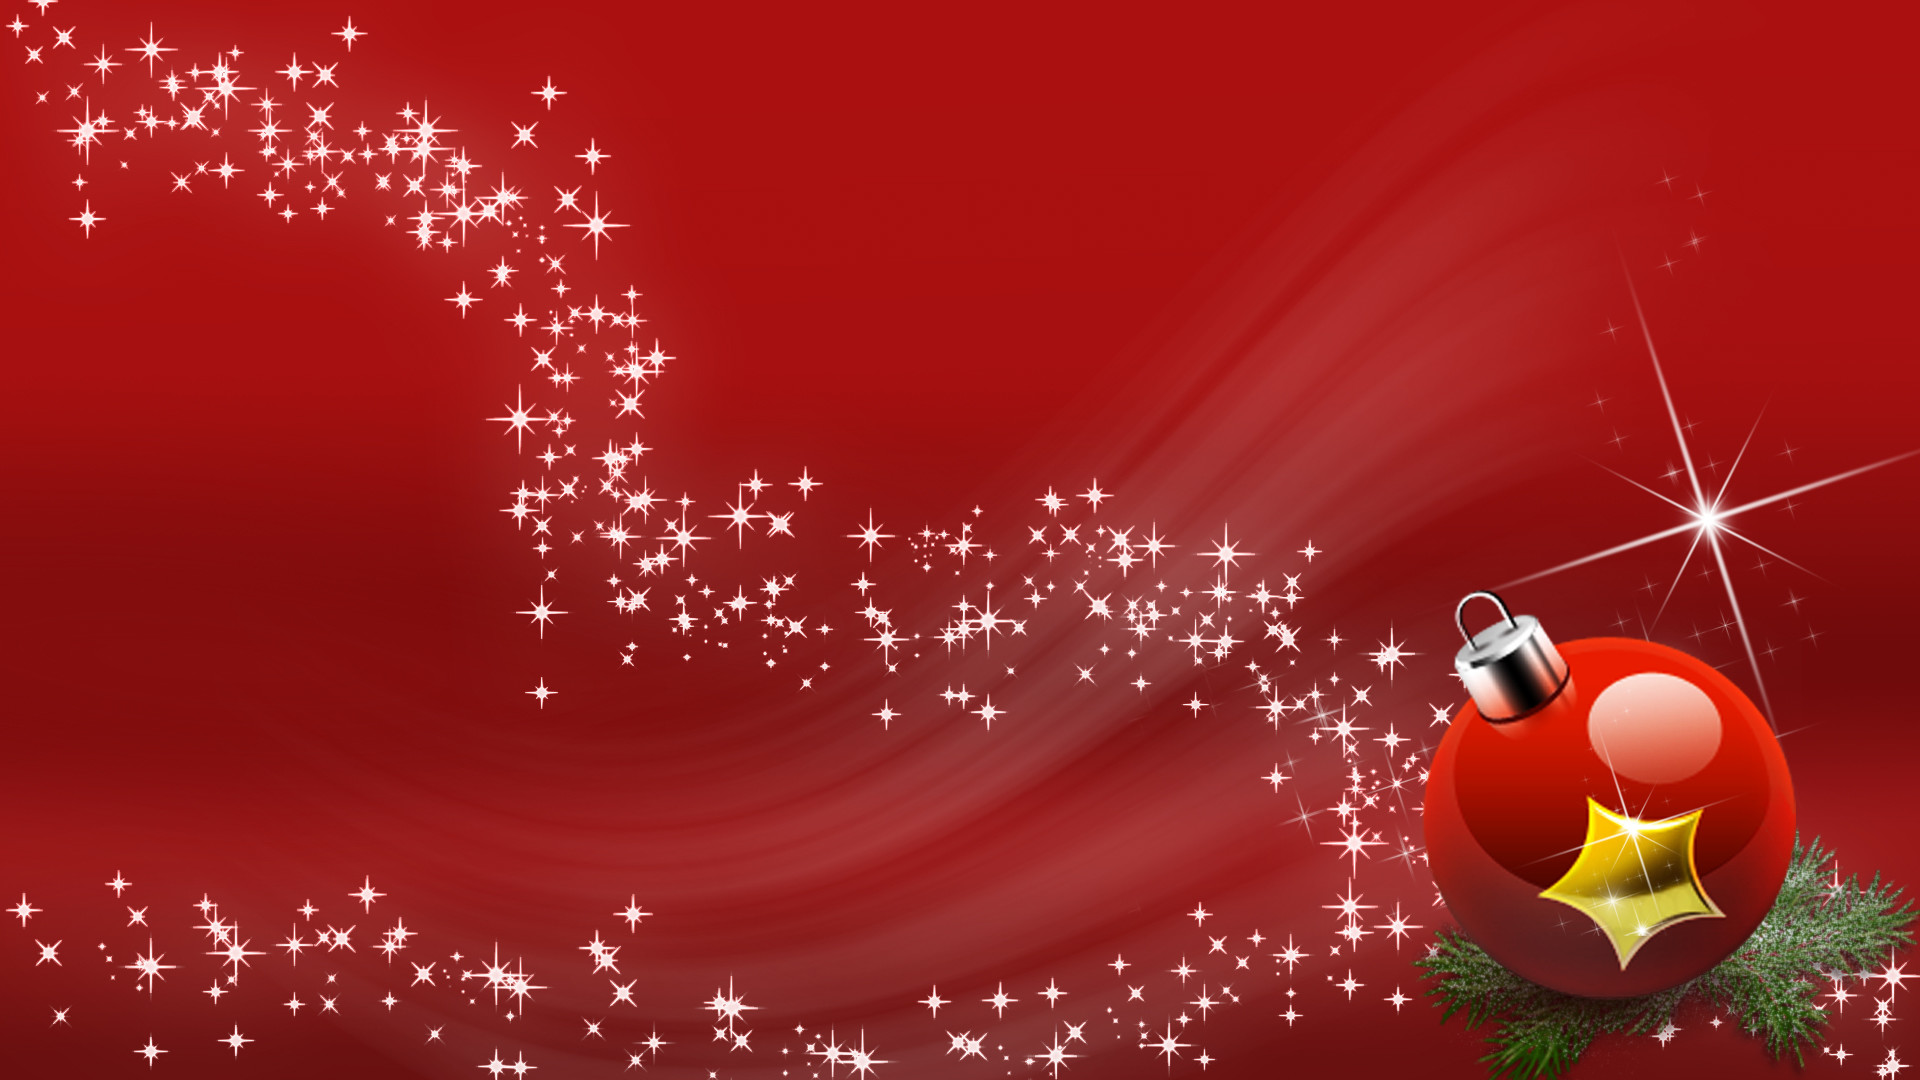 50 HD Christmas Wallpapers for iPhone Free Download